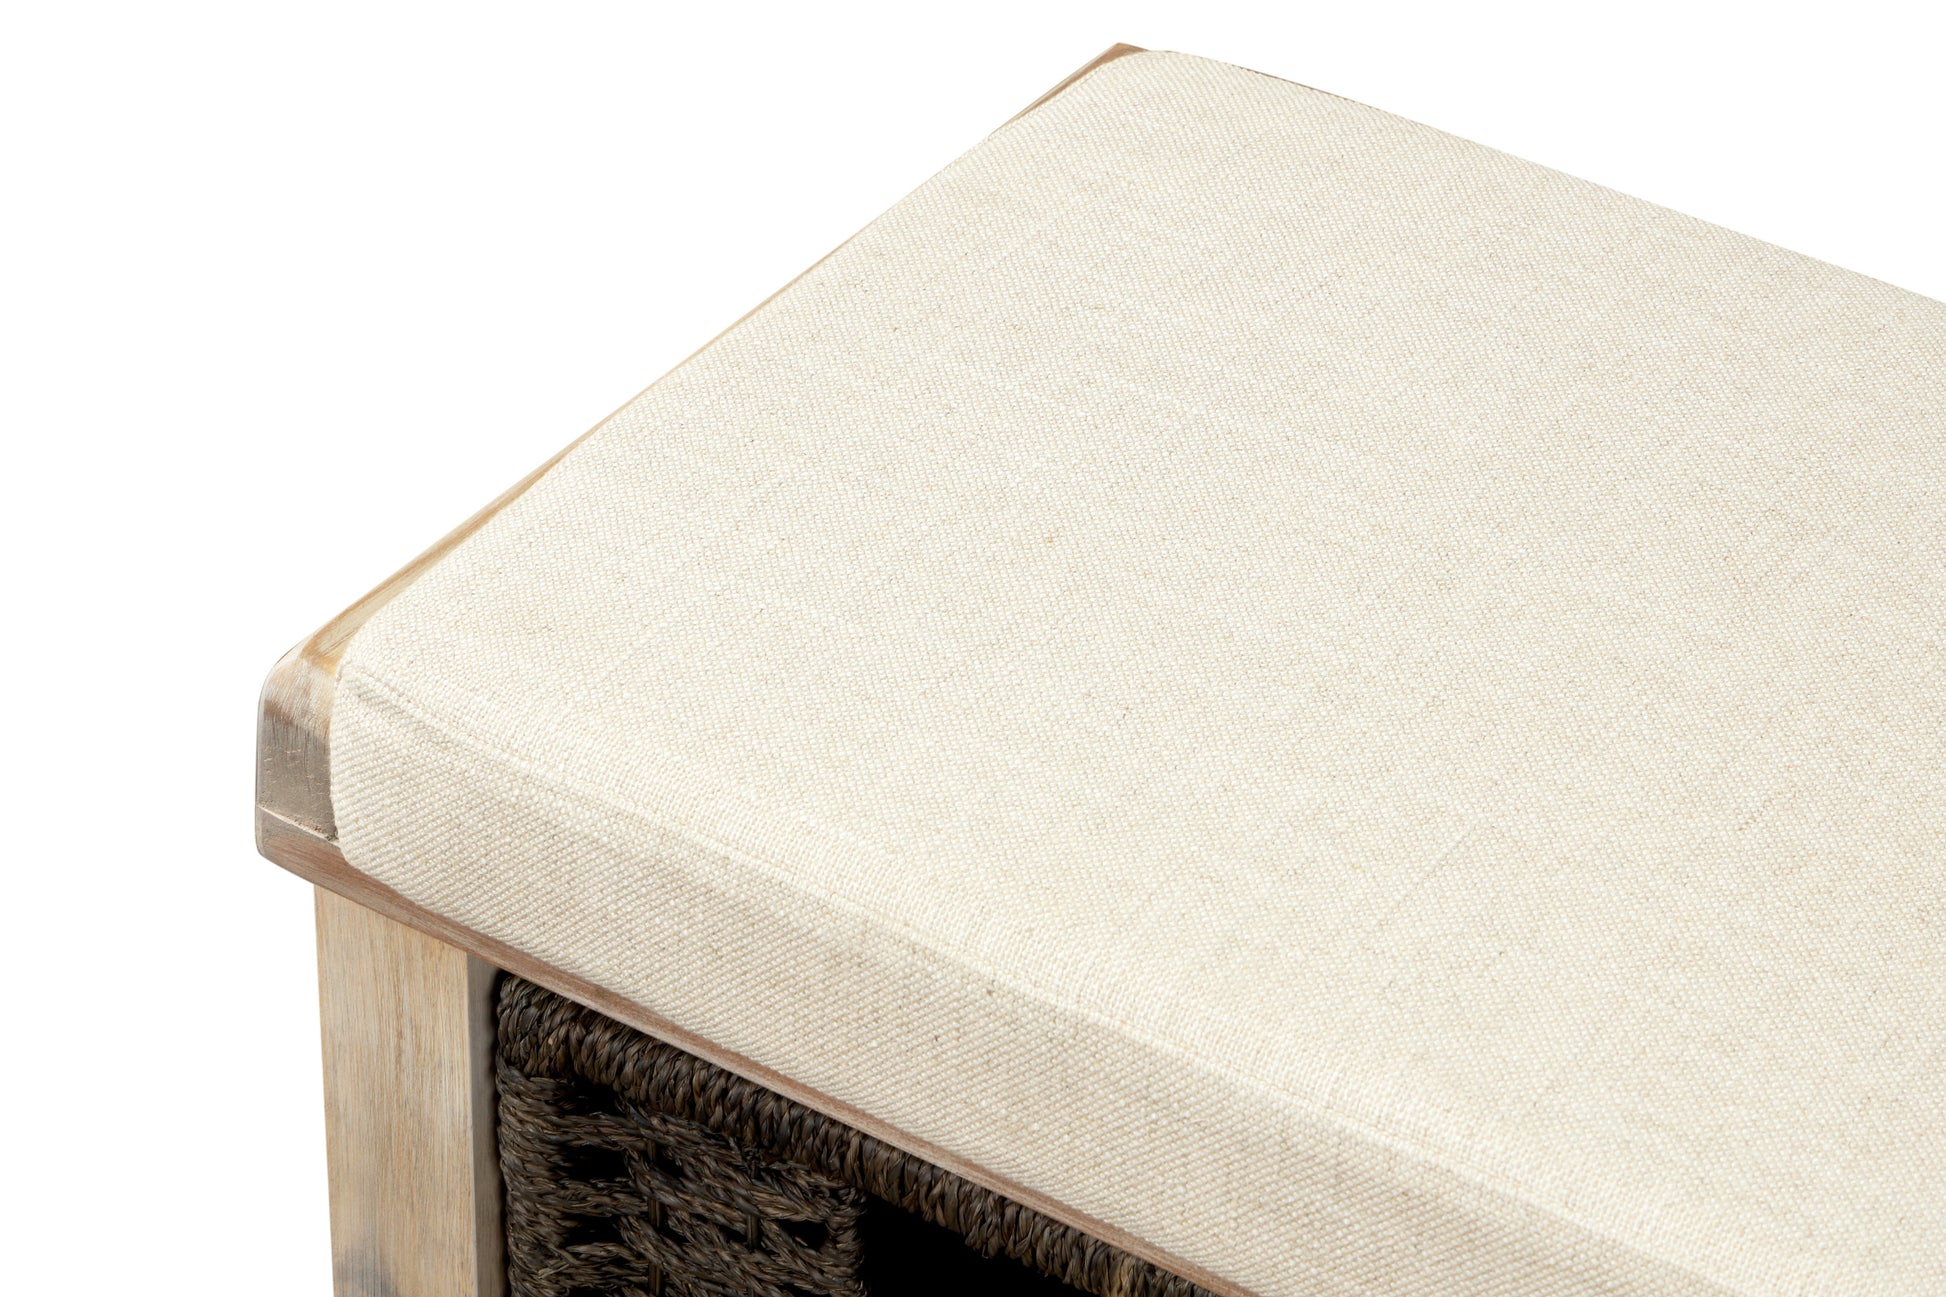 TREXM Rustic Storage Bench with 3 Removable Classic Rattan Basket - White Washed